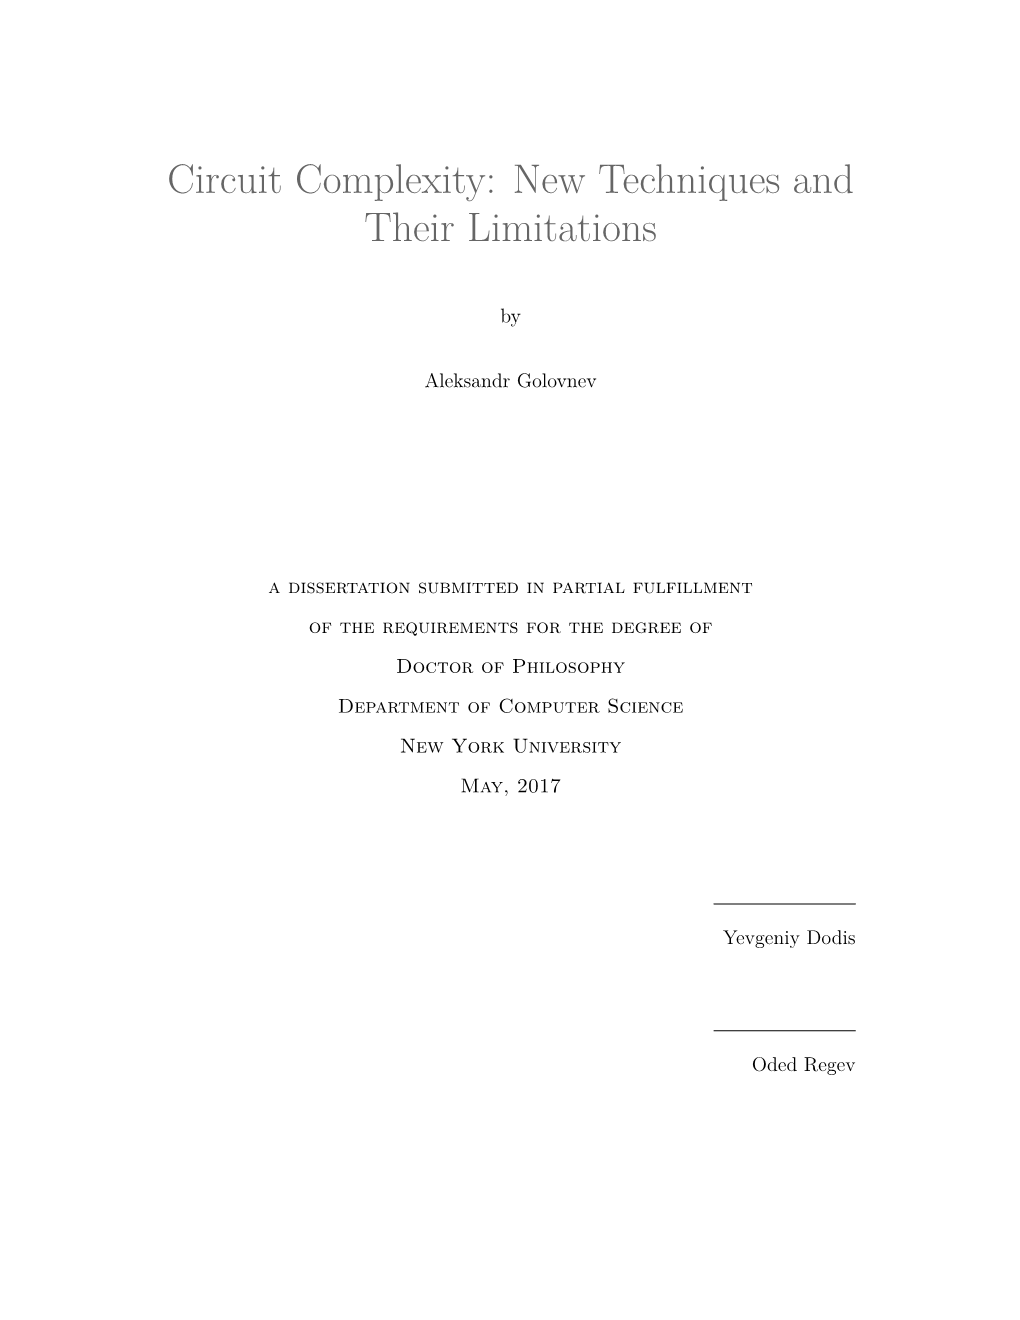 Circuit Complexity: New Techniques and Their Limitations